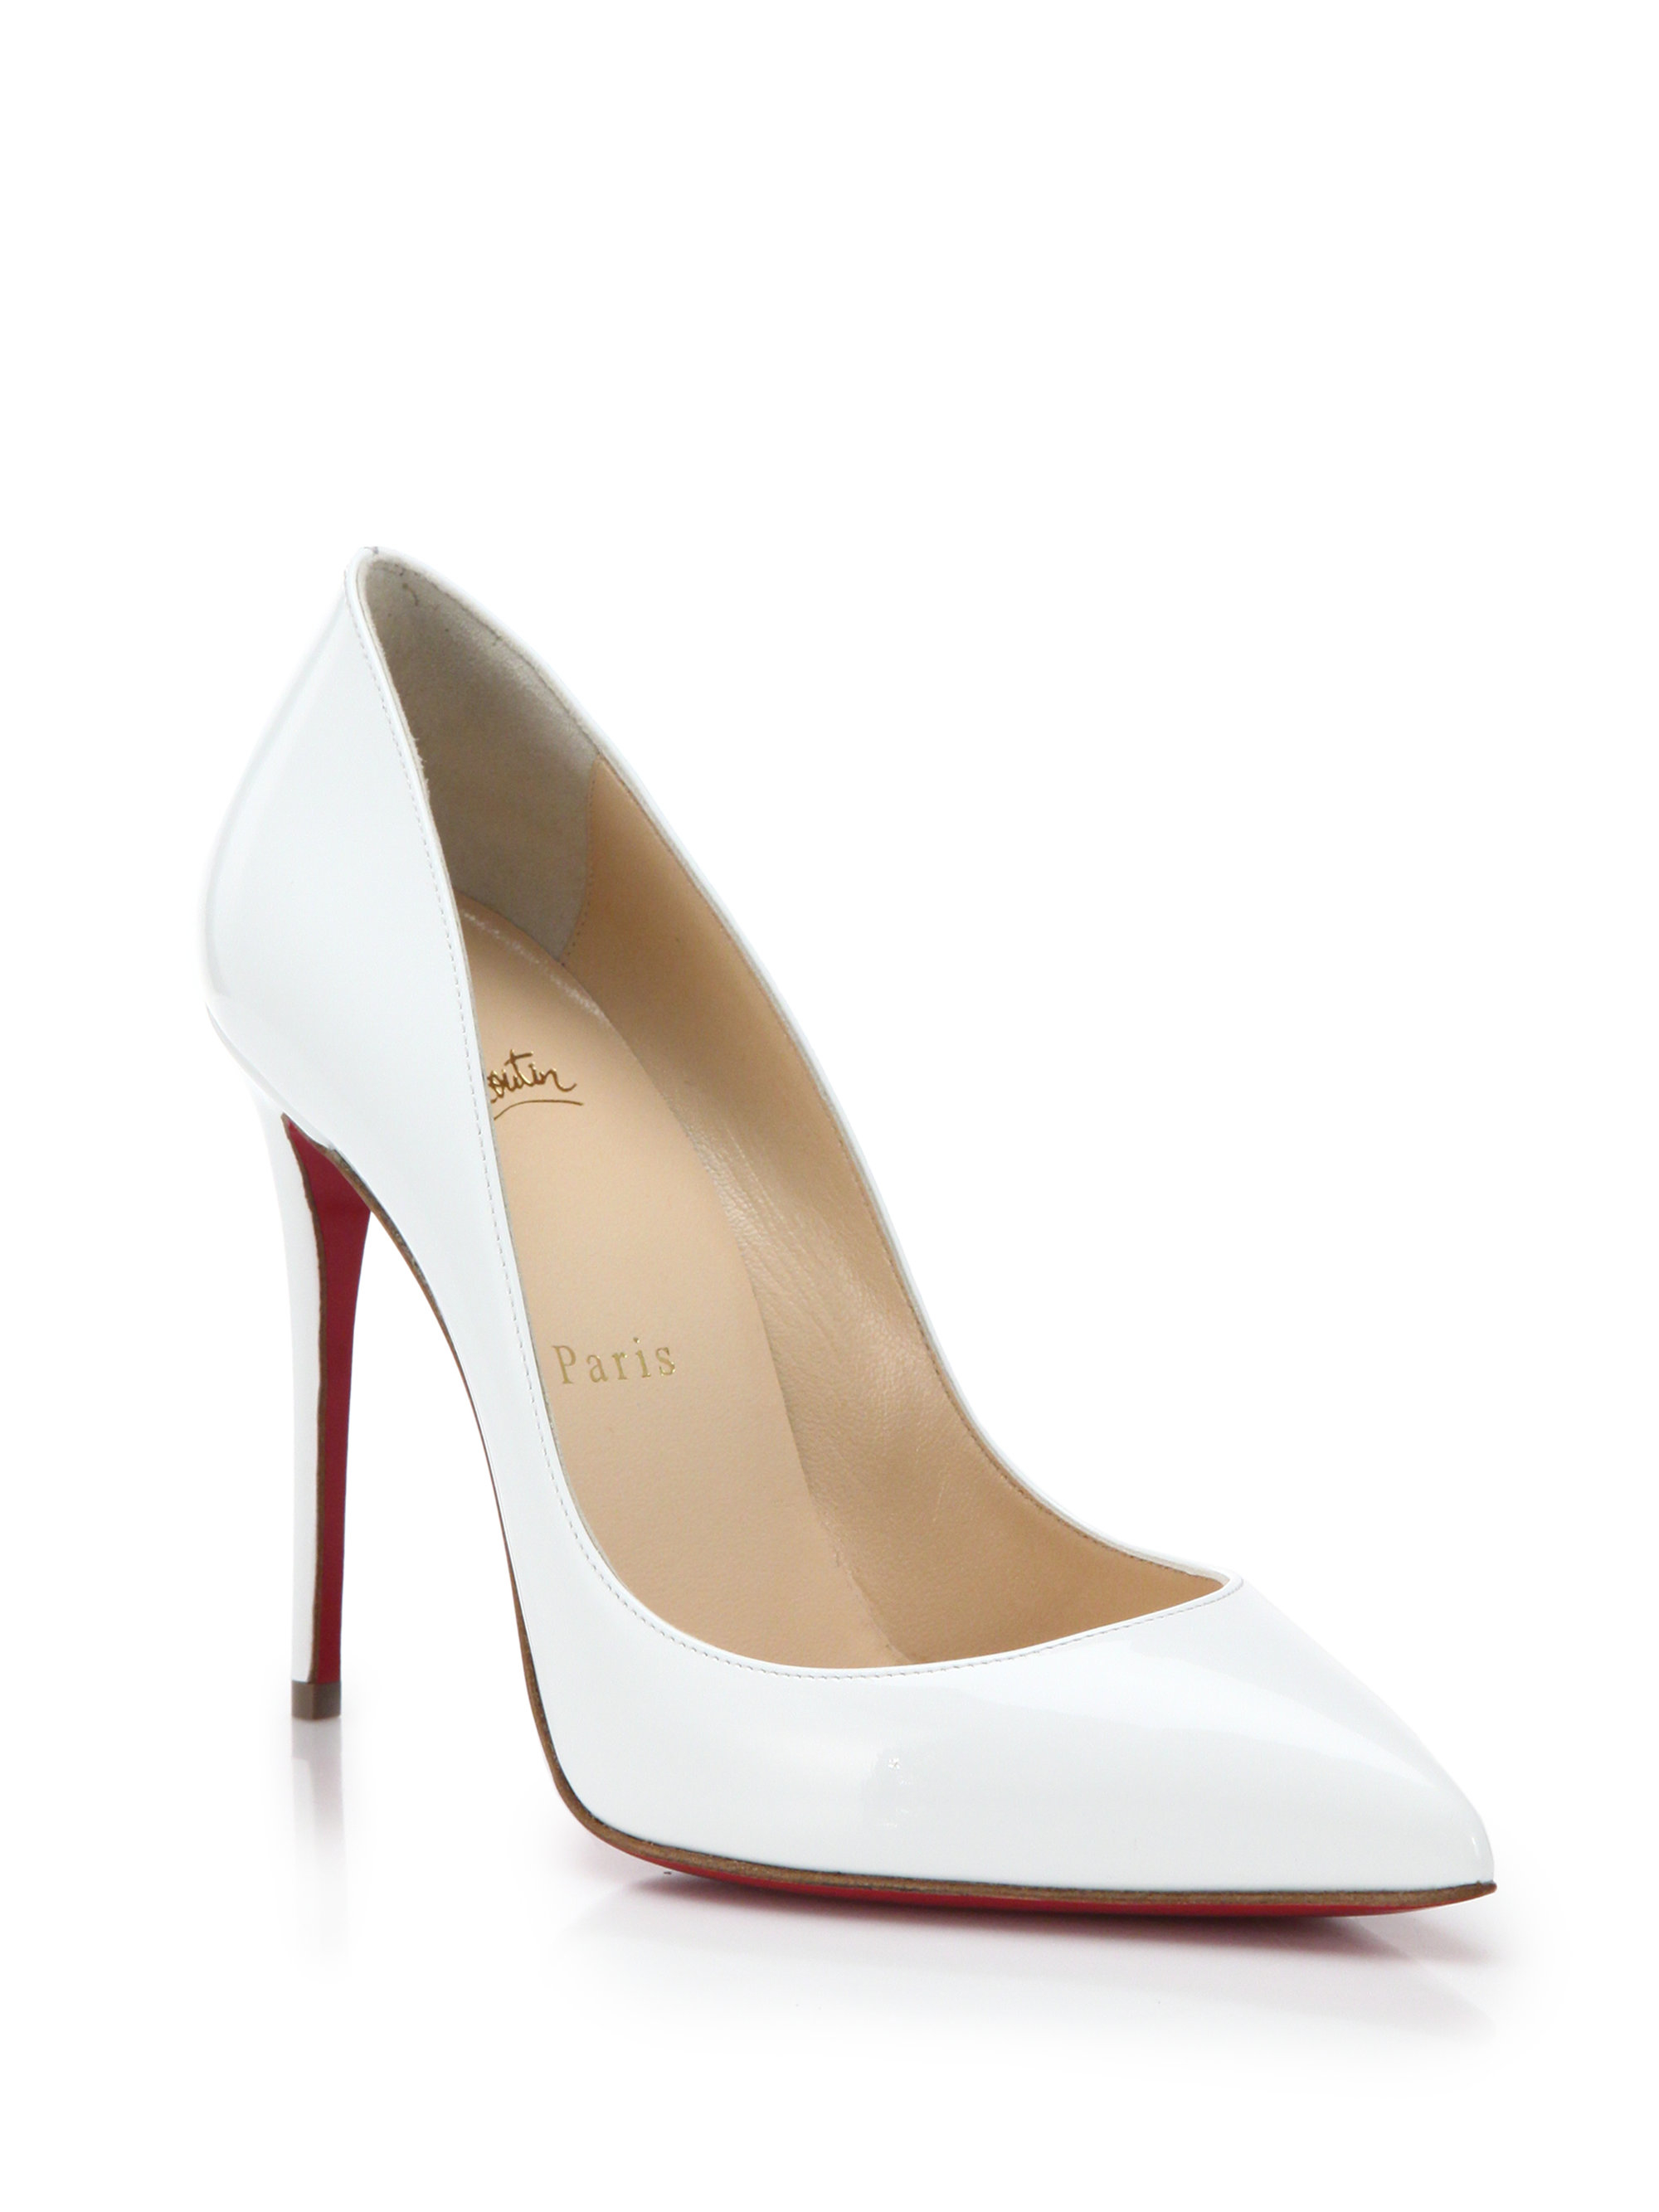 Pigalle Follies Patent Leather in - Lyst